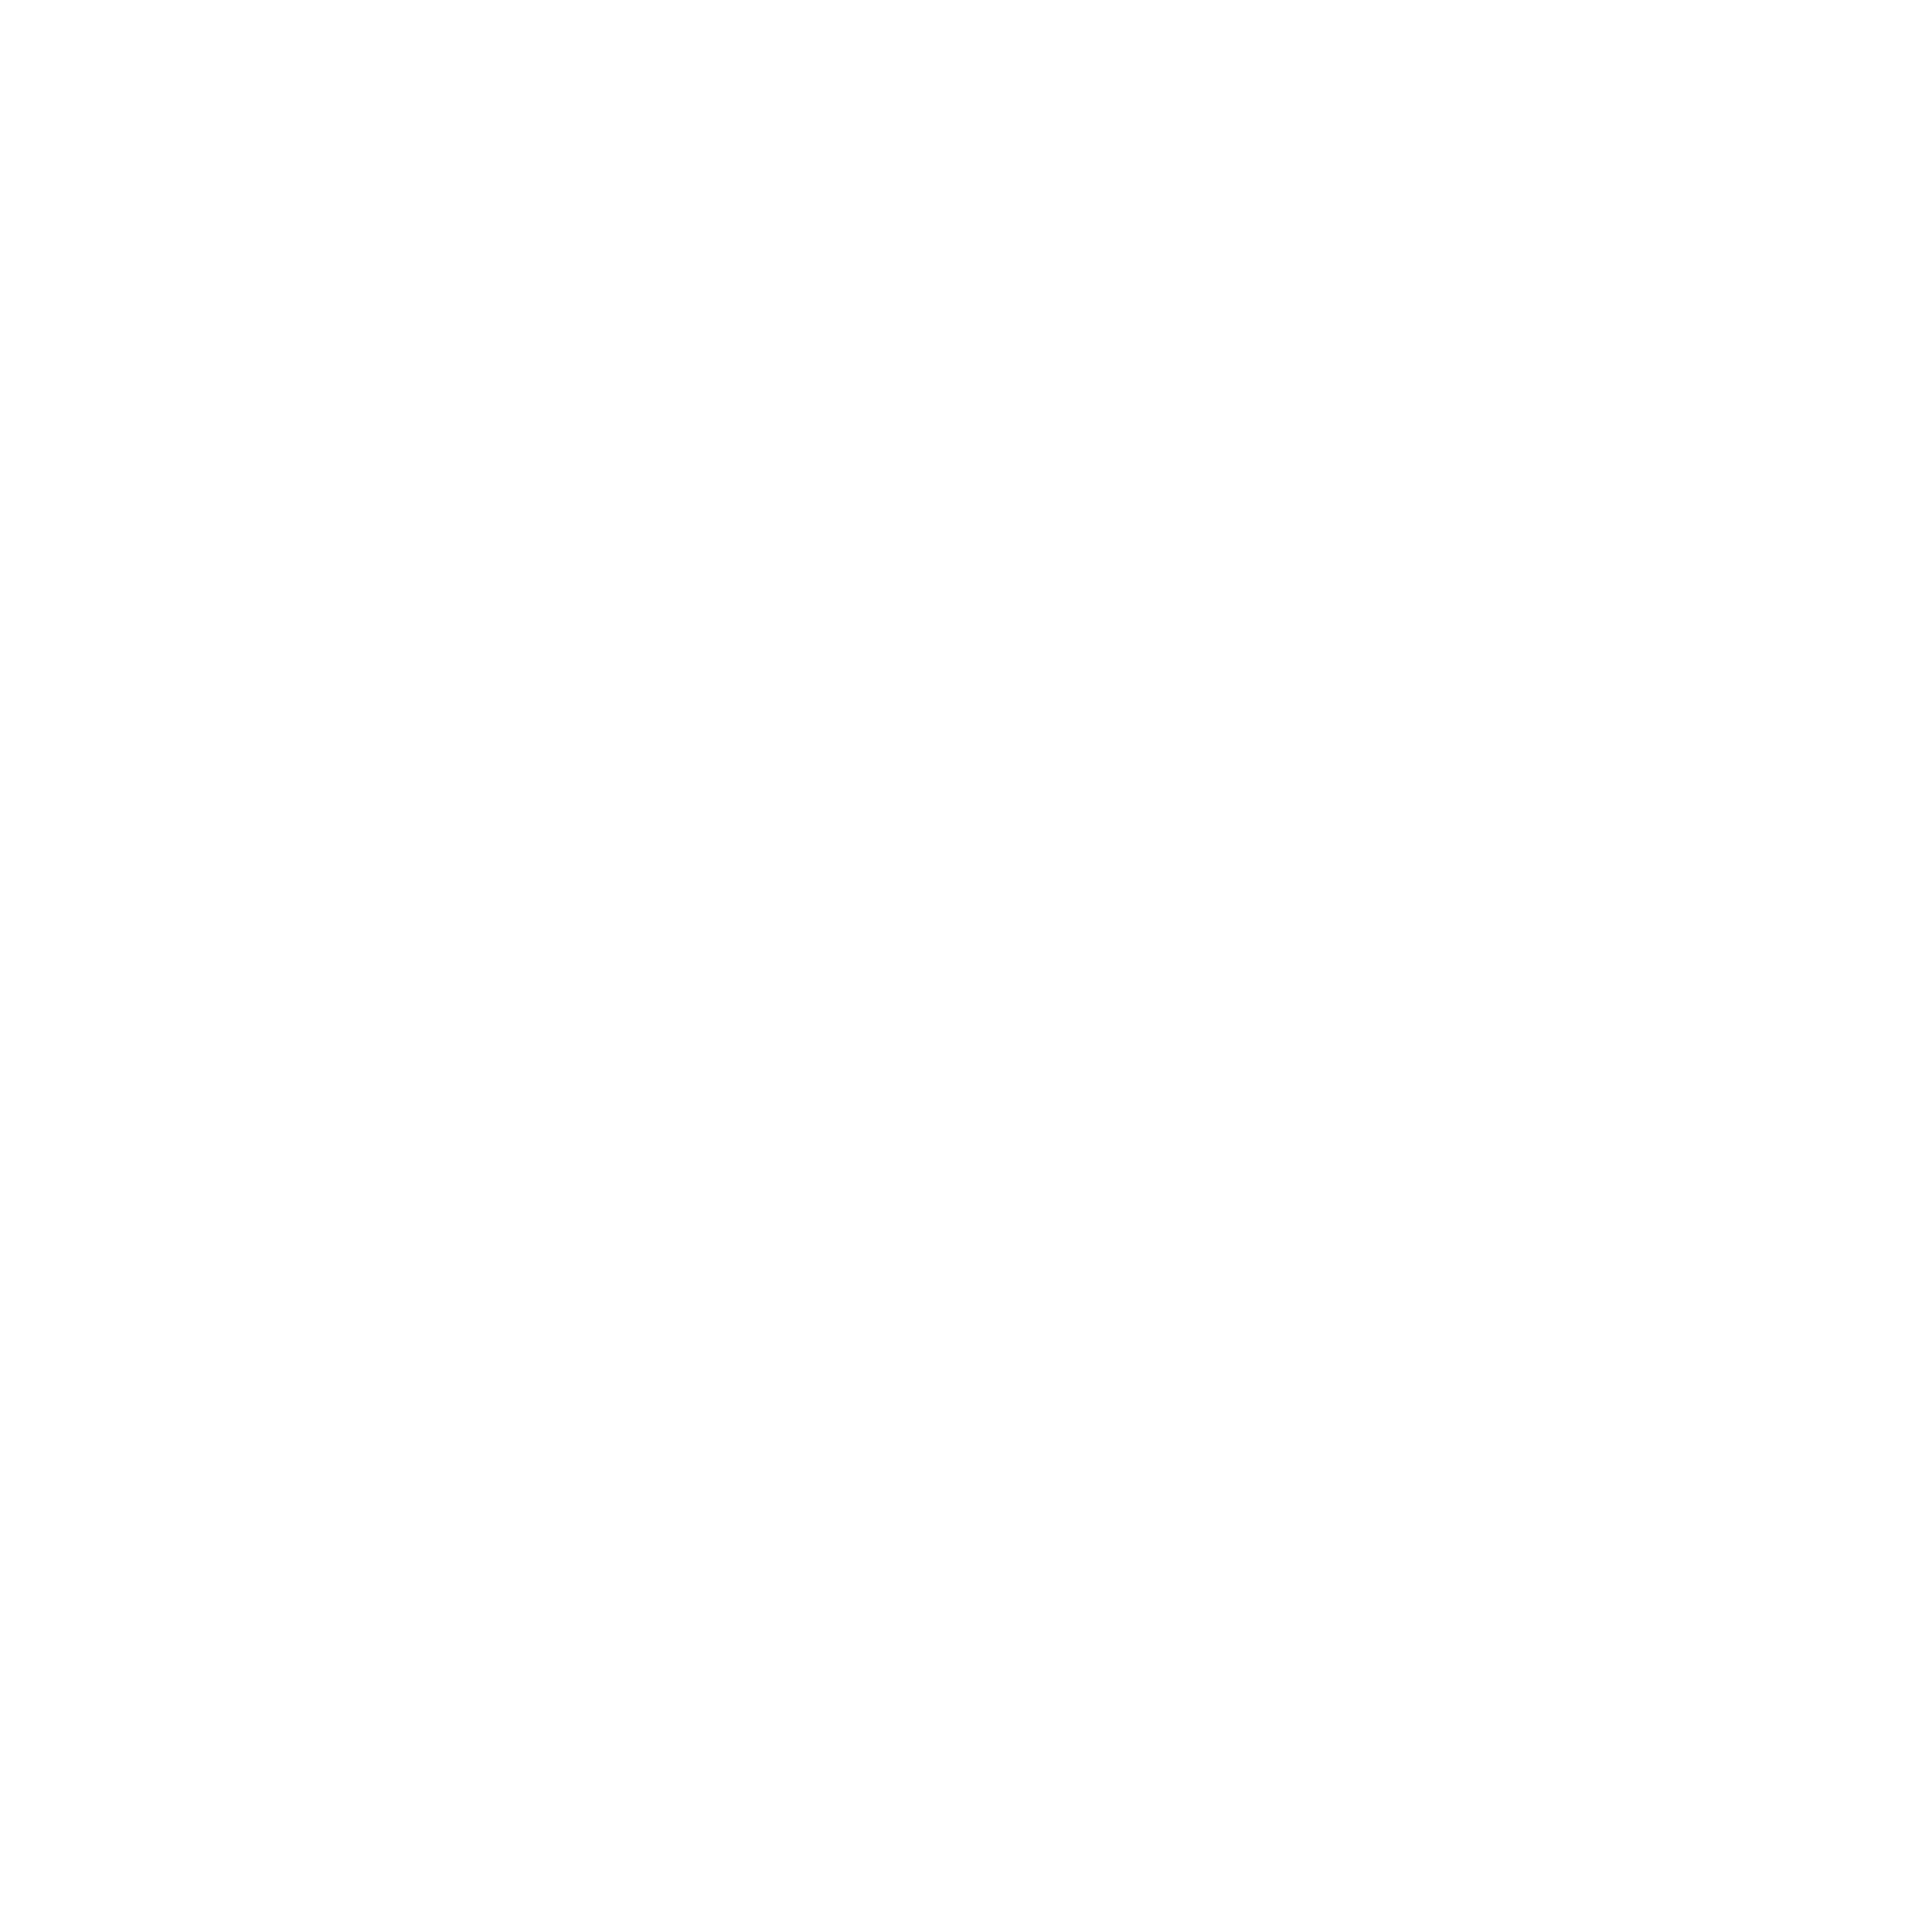 ds-logo-2.png